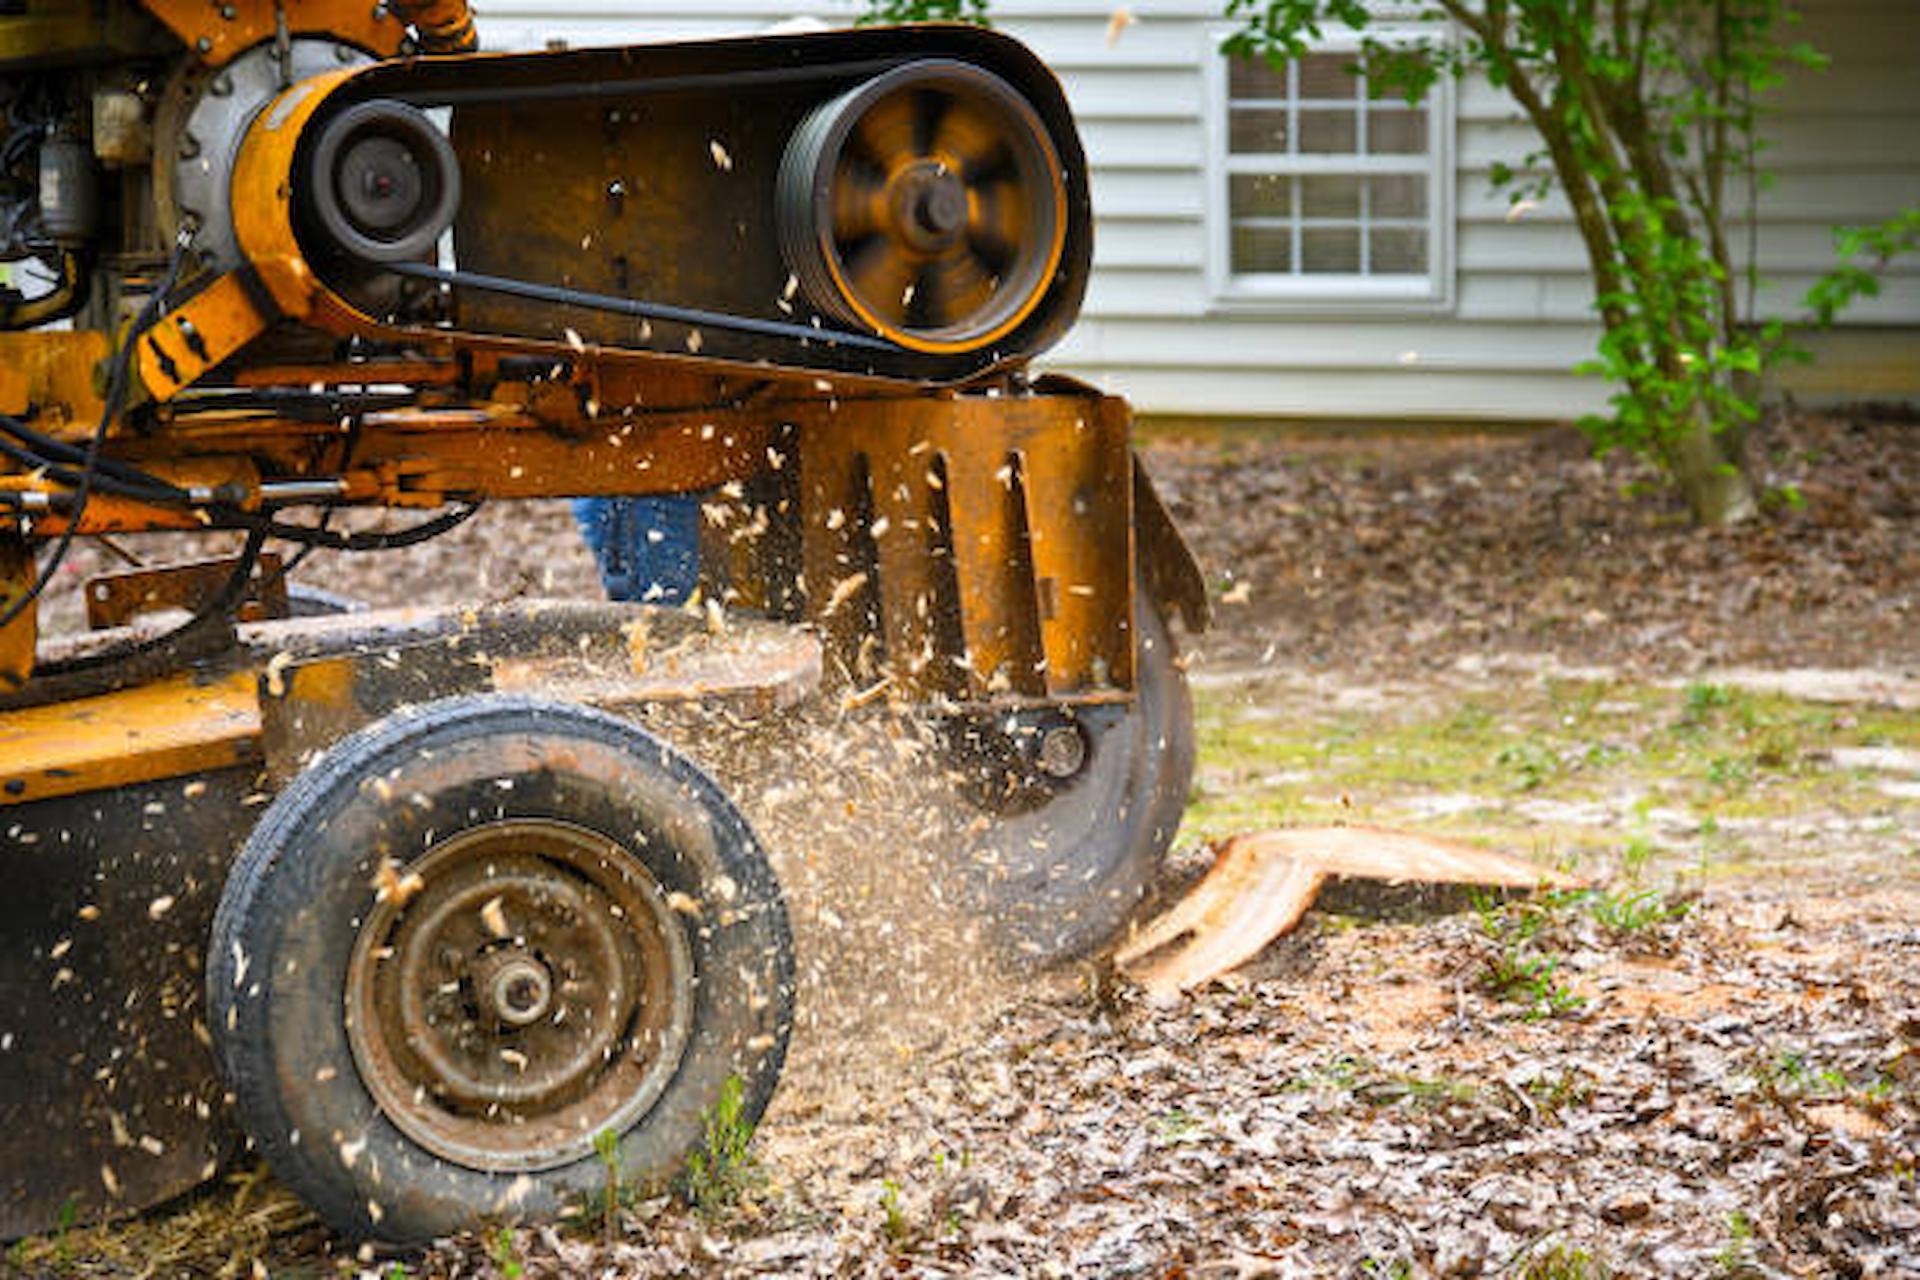 5 Super Amazing Benefits Of Stump Grinding For Your Yard